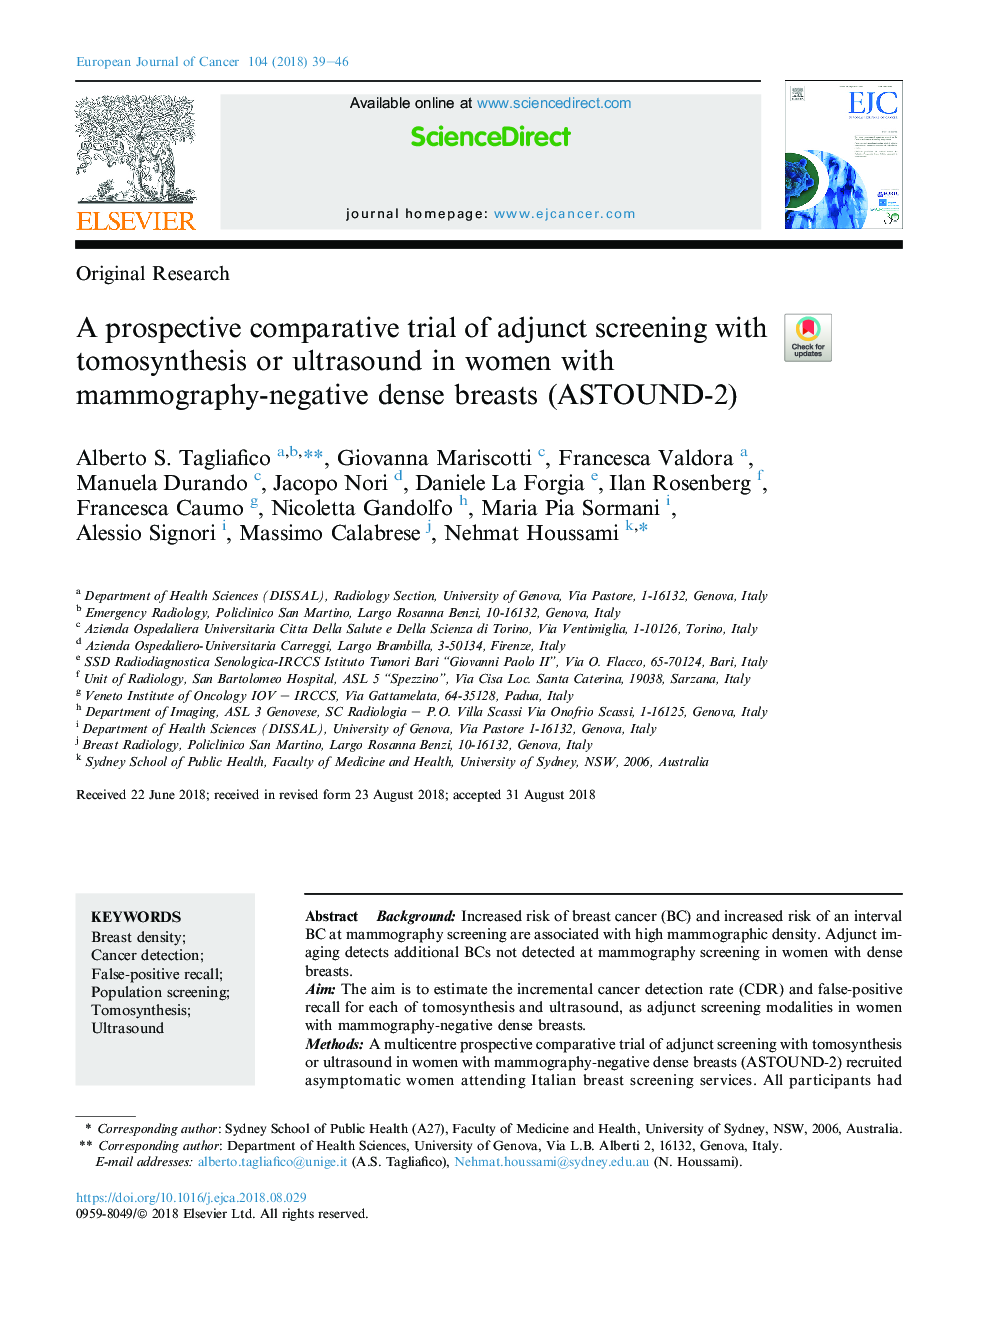 A prospective comparative trial of adjunct screening with tomosynthesis or ultrasound in women with mammography-negative dense breasts (ASTOUND-2)